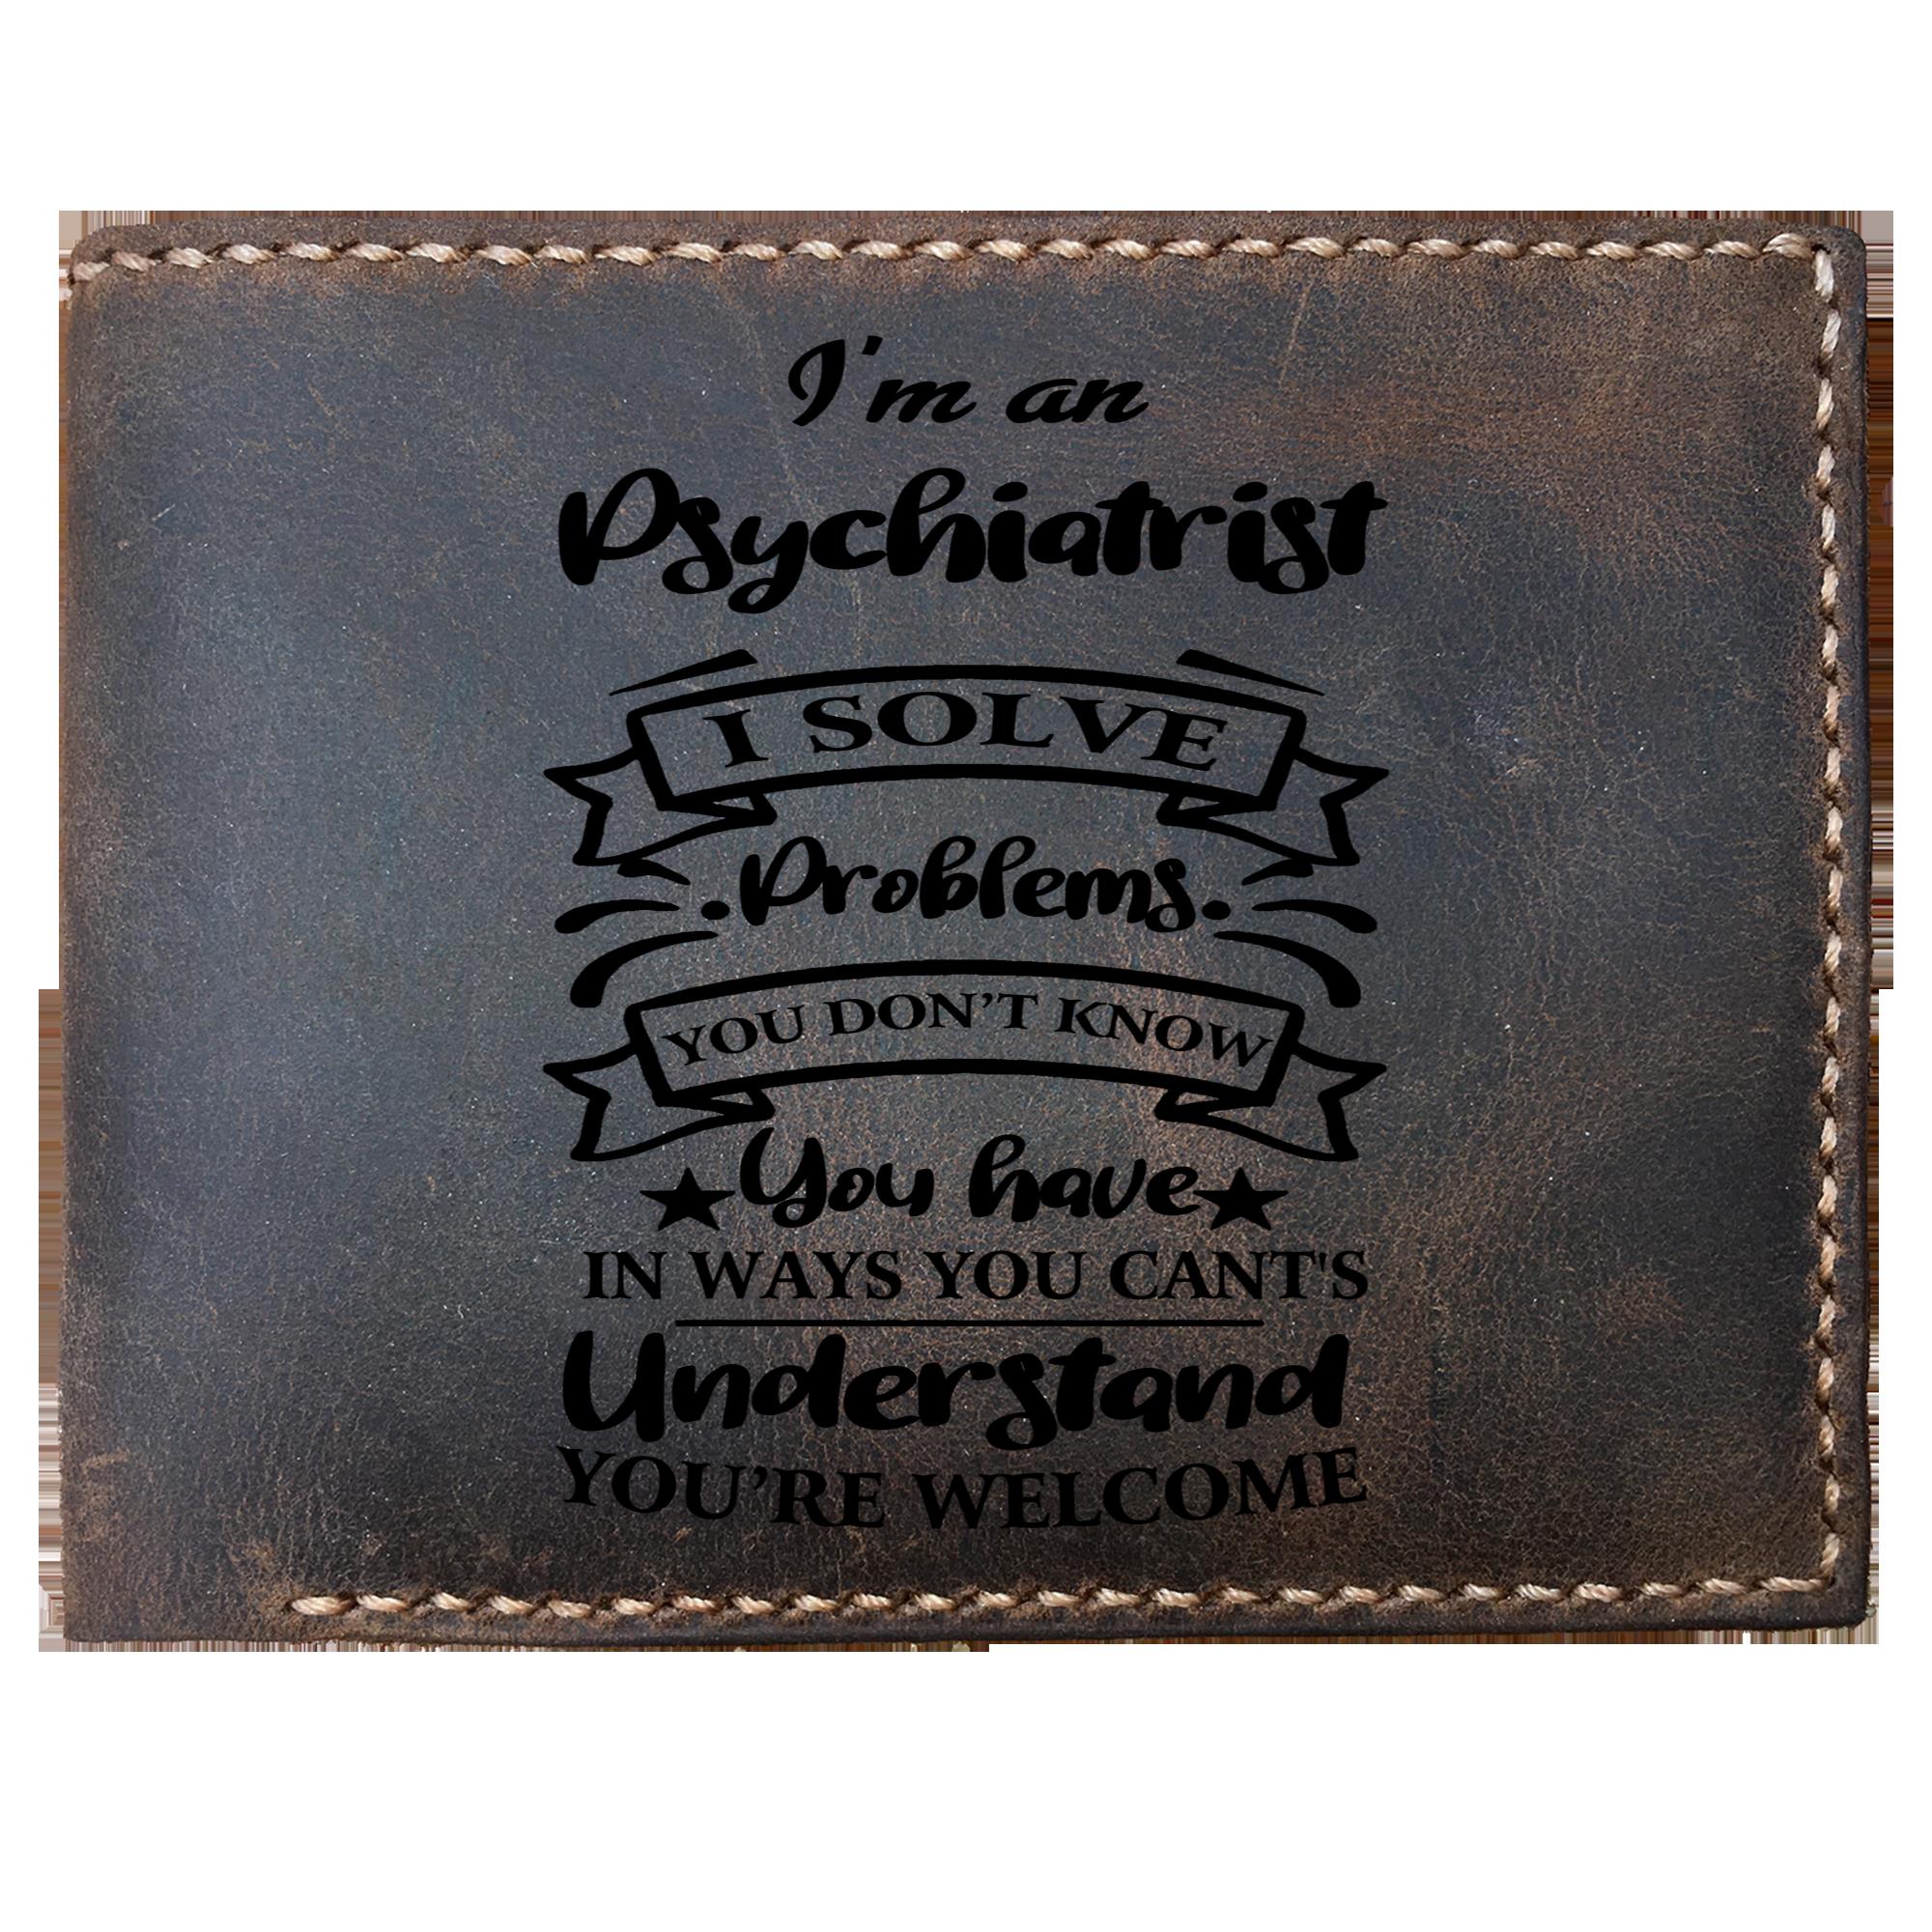 Skitongifts Funny Custom Laser Engraved Bifold Leather Wallet For Men, I'm an Psychiatrist Solve Problems, Father's Day Gifts